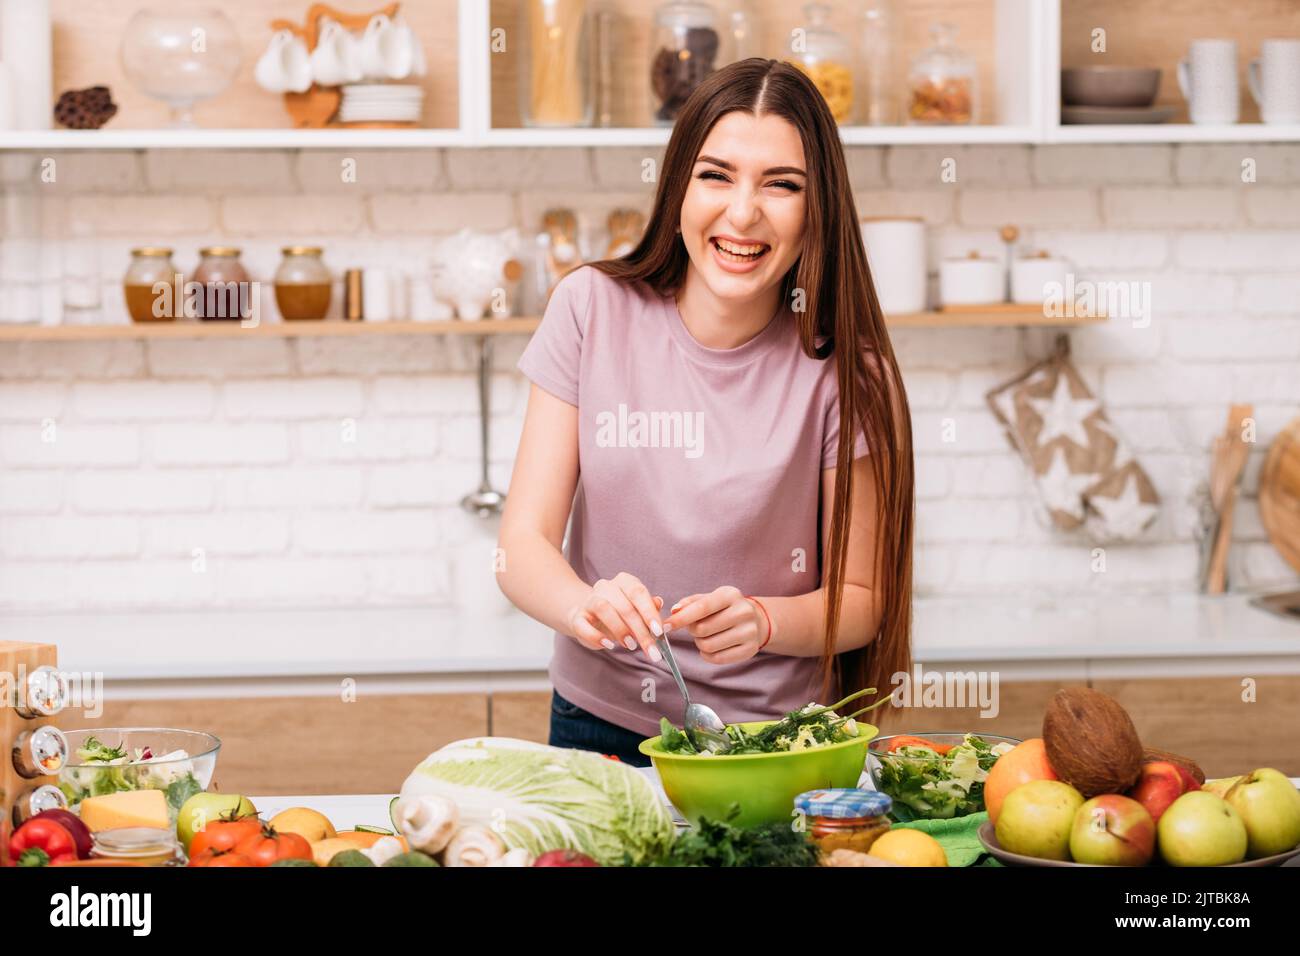 female cooking hobby lifestyle healthy whole food Stock Photo